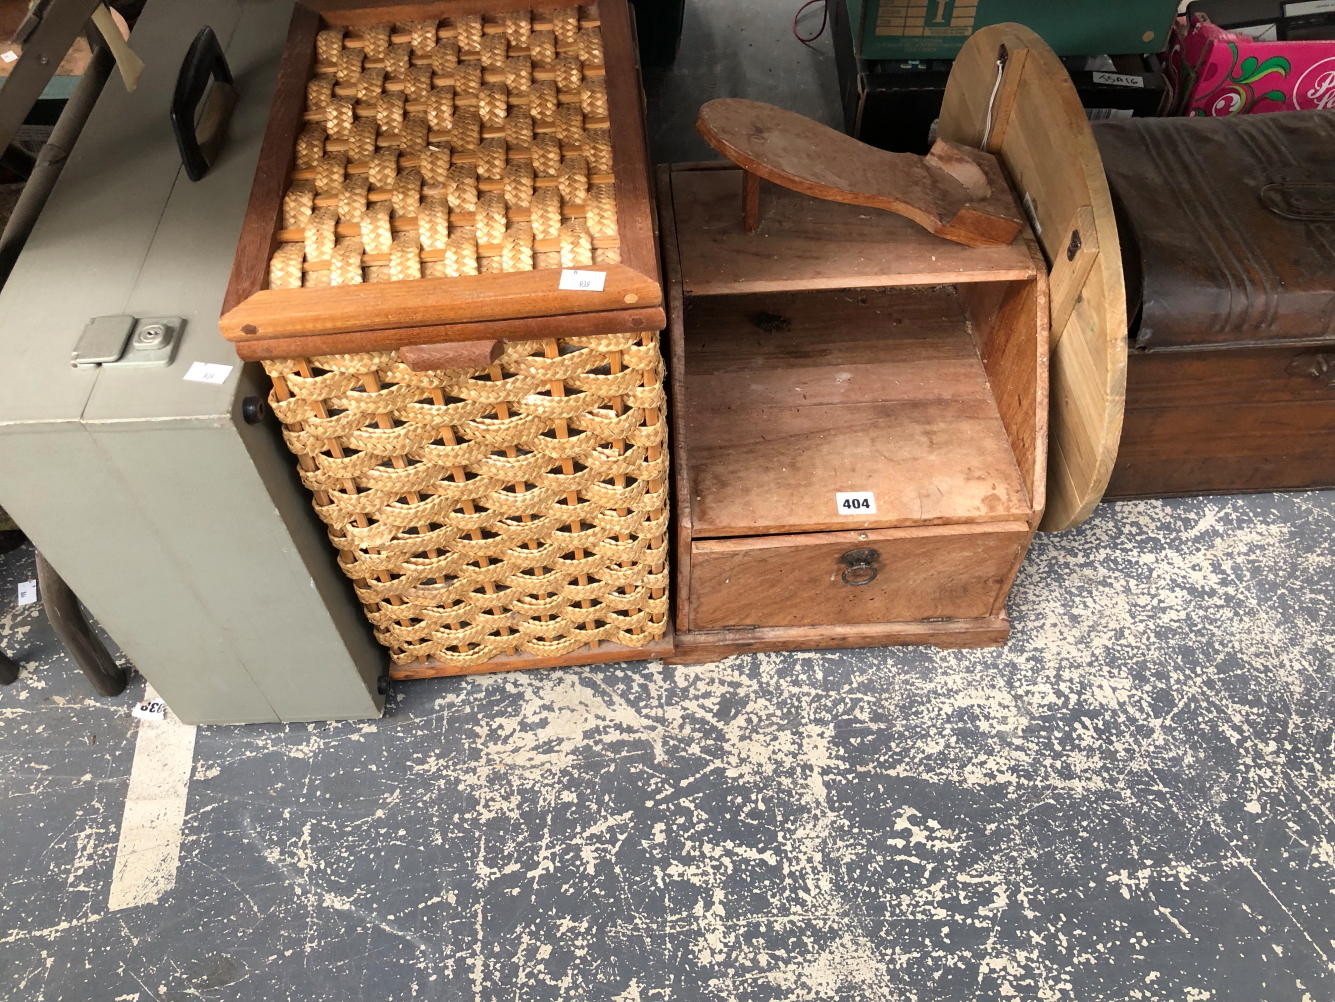 A SHOE CLEANING WOODEN BOX, 2 BASKETS, A TIN TRUNK, AN OTTOMAN FOOTSTOOL, A CHEESE BOARD, ETC